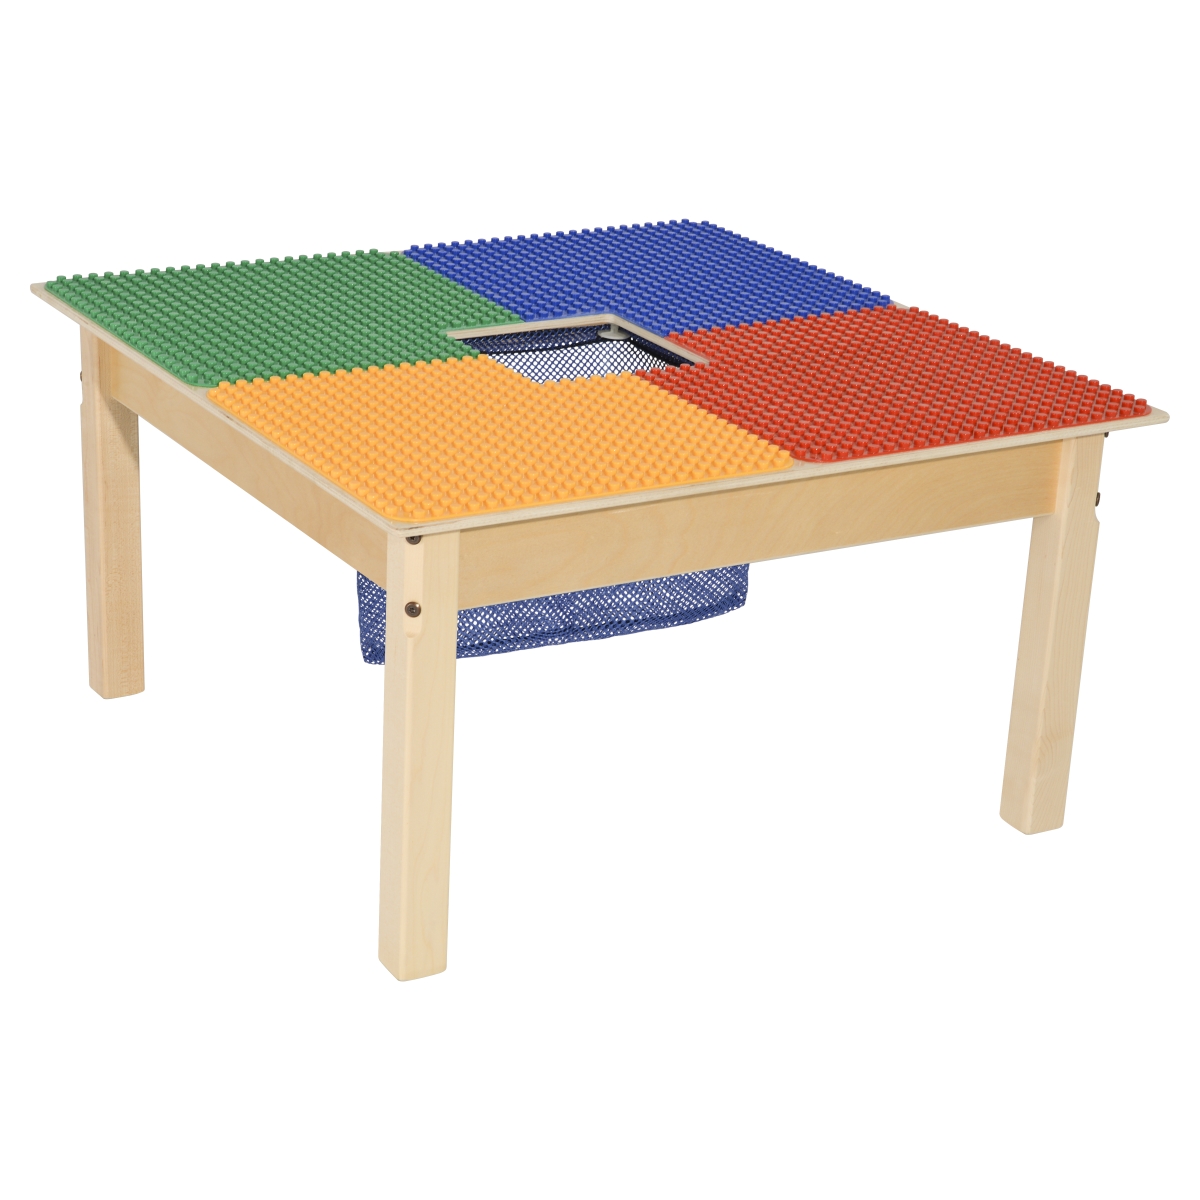 Tp3131pgn18 18 In. Duplo Compatible Square Table With Legs, Multi Color